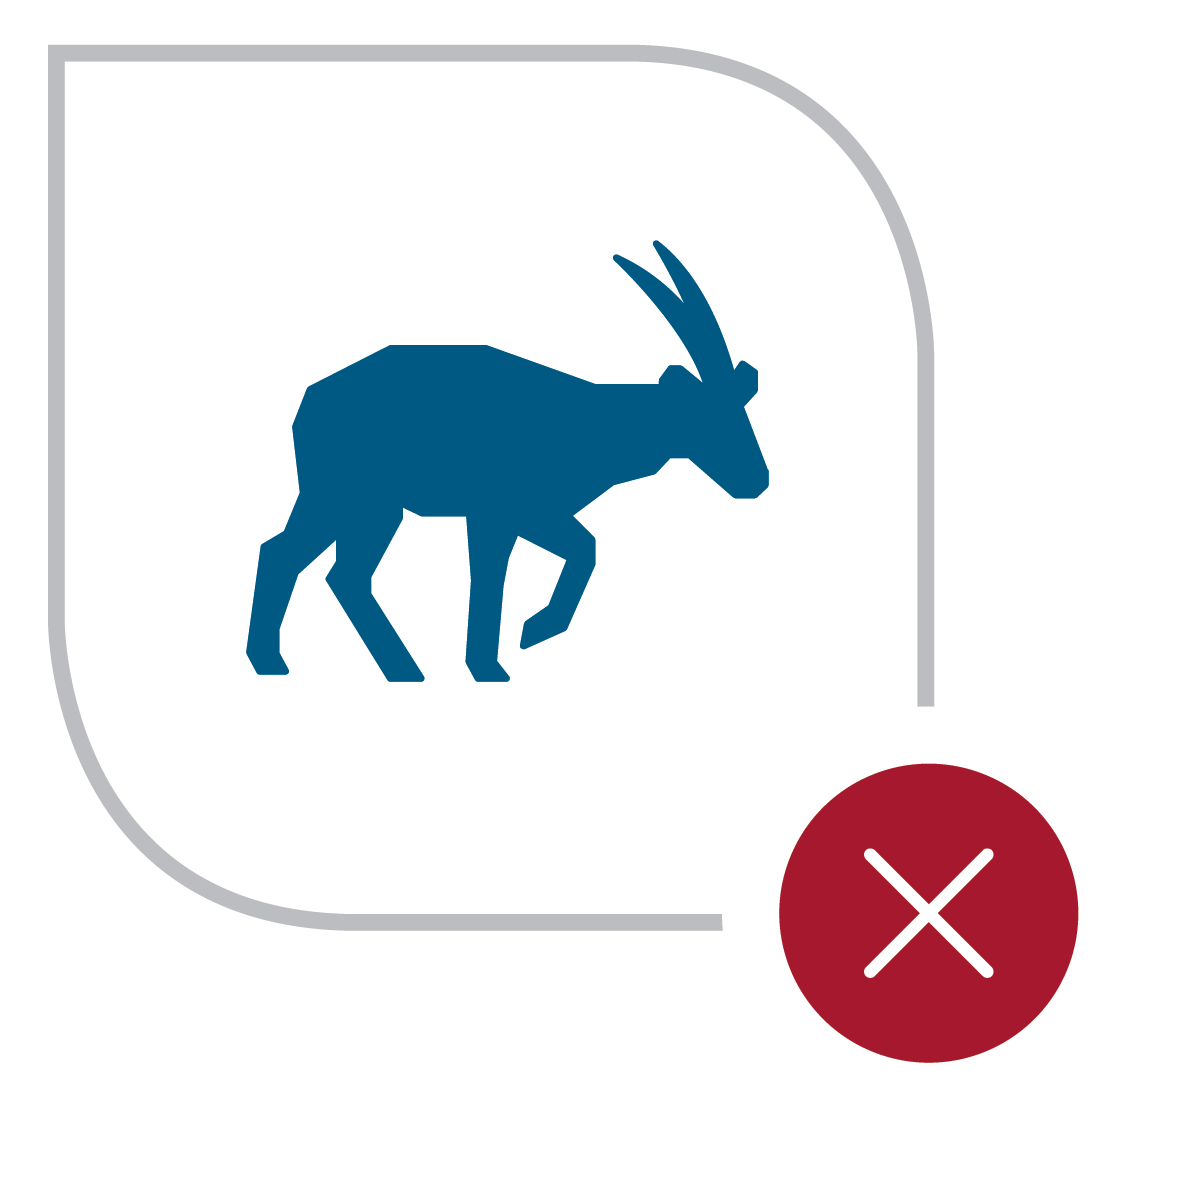 An icon featuring the silhouette of a gazelle with a red X in the bottom right